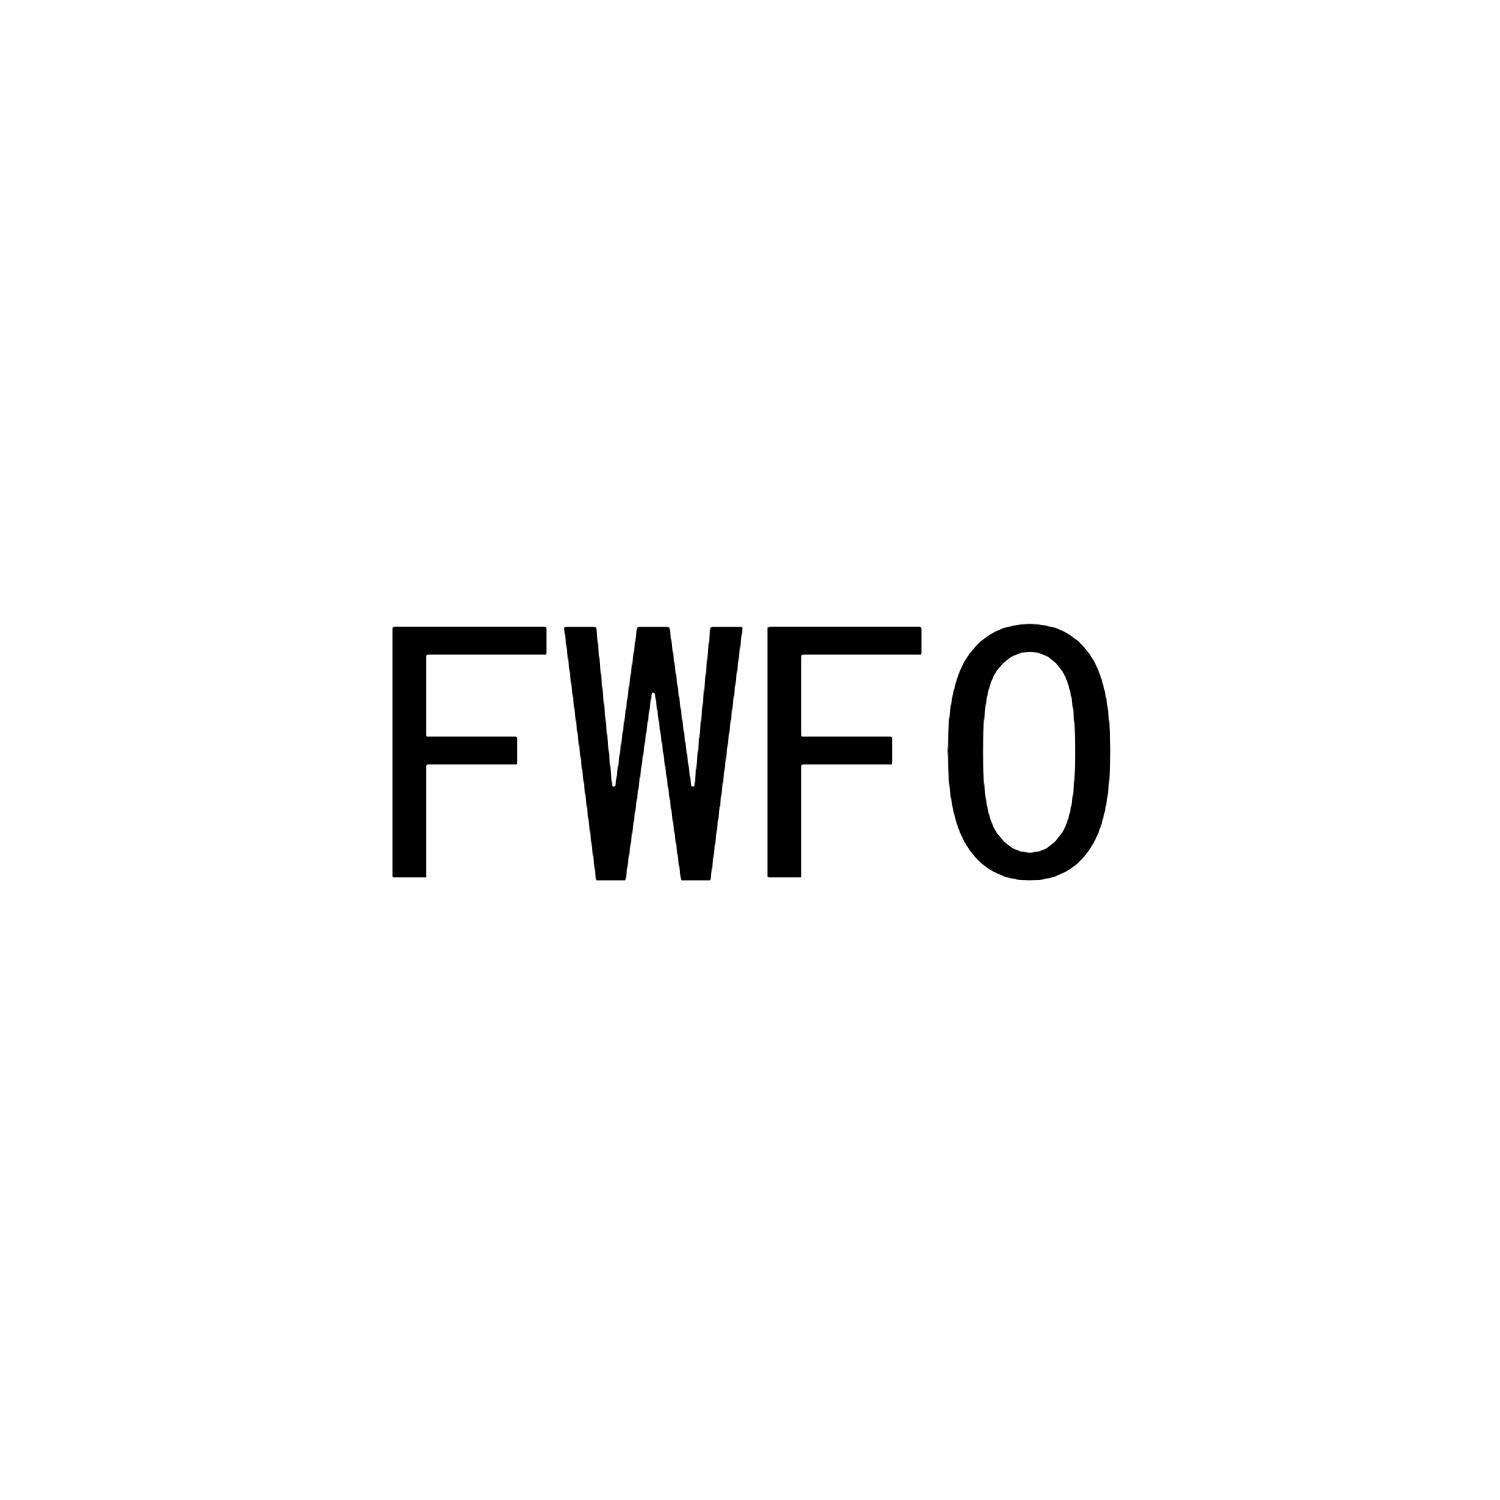 FWFO